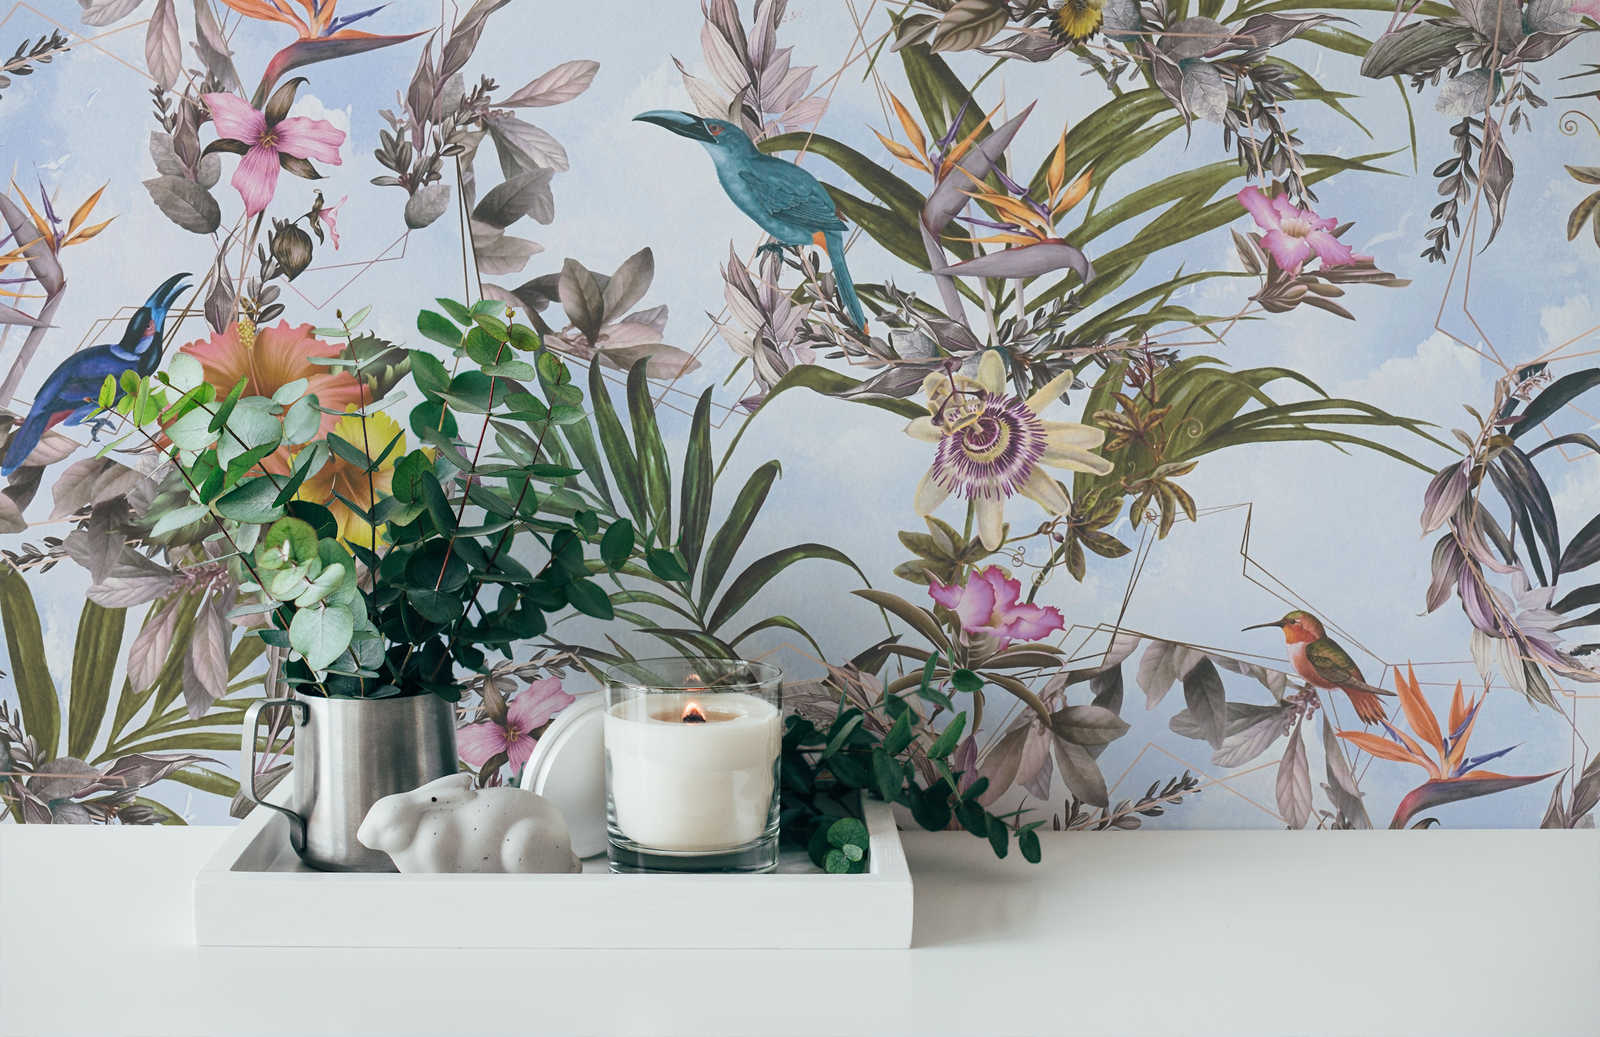             Floral wallpaper with birds & tropical look - colourful, blue, green
        